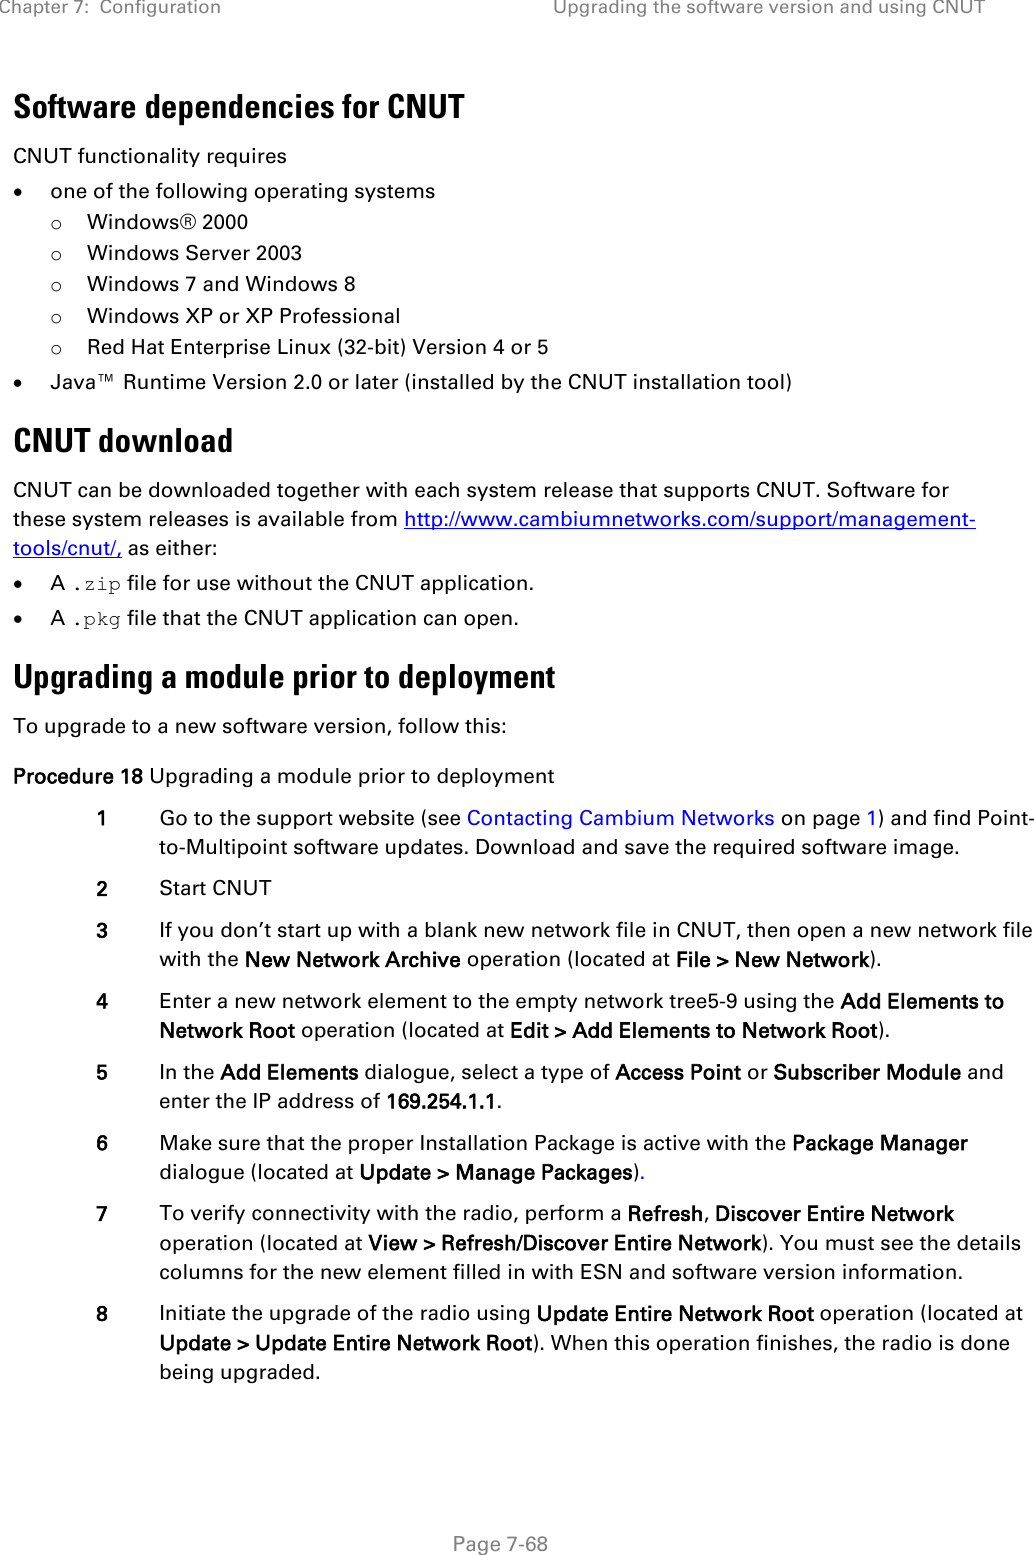 Chapter 7:  Configuration Upgrading the software version and using CNUT   Page 7-68 Software dependencies for CNUT CNUT functionality requires • one of the following operating systems o Windows® 2000 o Windows Server 2003 o Windows 7 and Windows 8 o Windows XP or XP Professional o Red Hat Enterprise Linux (32-bit) Version 4 or 5 • Java™ Runtime Version 2.0 or later (installed by the CNUT installation tool) CNUT download CNUT can be downloaded together with each system release that supports CNUT. Software for these system releases is available from http://www.cambiumnetworks.com/support/management-tools/cnut/, as either: • A .zip file for use without the CNUT application. • A .pkg file that the CNUT application can open. Upgrading a module prior to deployment To upgrade to a new software version, follow this: Procedure 18 Upgrading a module prior to deployment 1 Go to the support website (see Contacting Cambium Networks on page 1) and find Point-to-Multipoint software updates. Download and save the required software image. 2 Start CNUT 3 If you don’t start up with a blank new network file in CNUT, then open a new network file with the New Network Archive operation (located at File &gt; New Network). 4 Enter a new network element to the empty network tree5-9 using the Add Elements to Network Root operation (located at Edit &gt; Add Elements to Network Root). 5 In the Add Elements dialogue, select a type of Access Point or Subscriber Module and enter the IP address of 169.254.1.1. 6 Make sure that the proper Installation Package is active with the Package Manager dialogue (located at Update &gt; Manage Packages). 7 To verify connectivity with the radio, perform a Refresh, Discover Entire Network operation (located at View &gt; Refresh/Discover Entire Network). You must see the details columns for the new element filled in with ESN and software version information. 8 Initiate the upgrade of the radio using Update Entire Network Root operation (located at Update &gt; Update Entire Network Root). When this operation finishes, the radio is done being upgraded. 